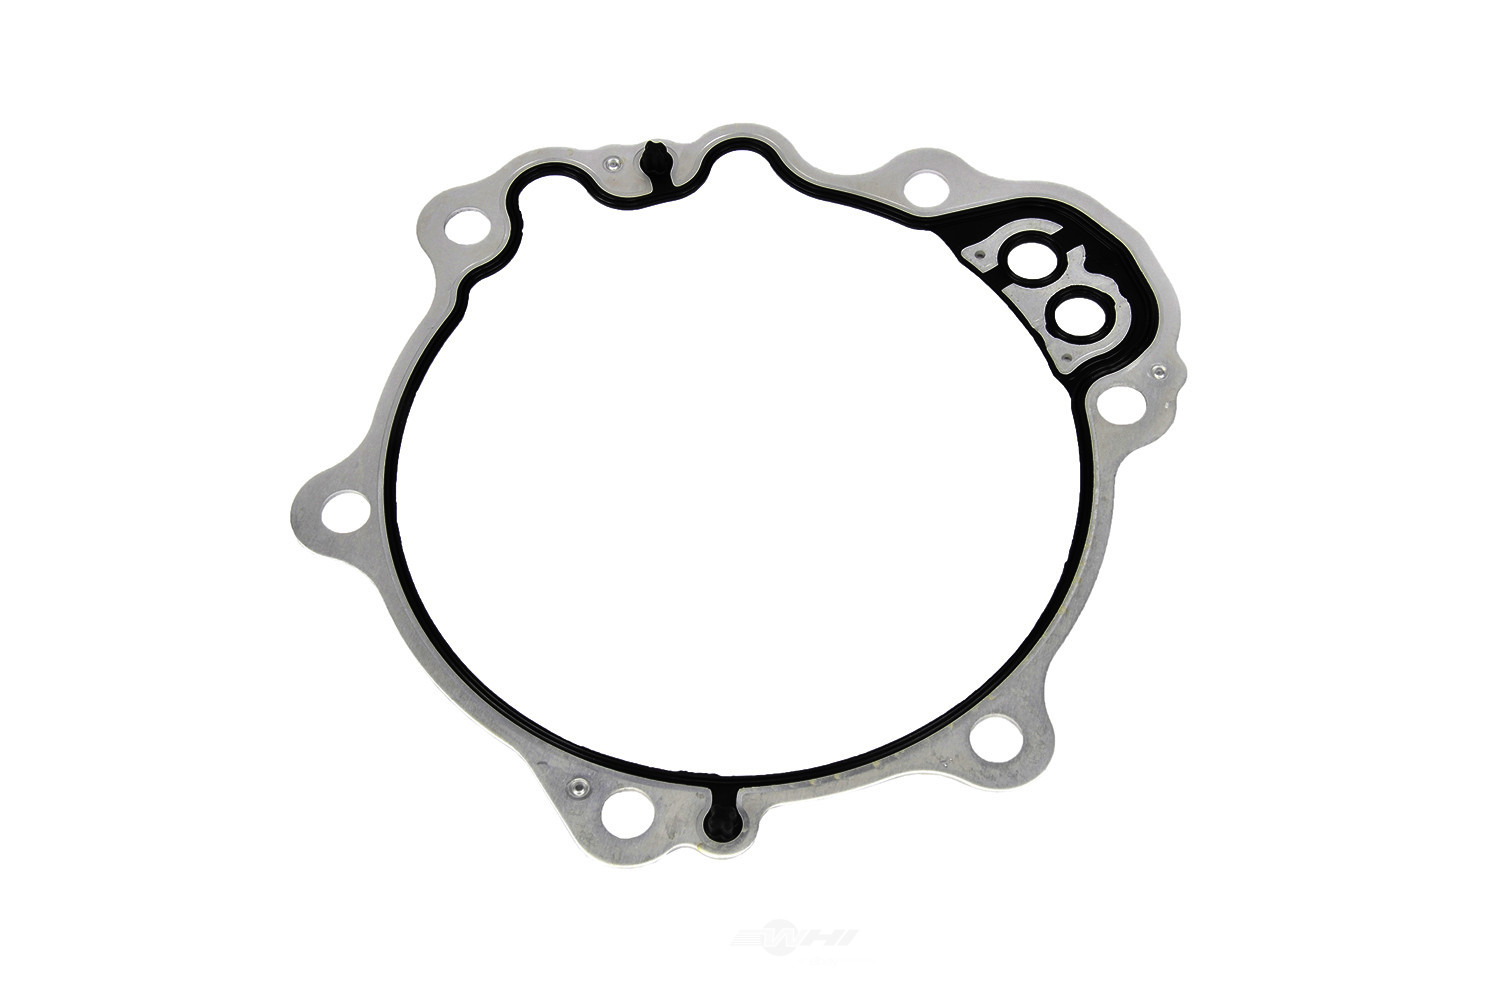 GM GENUINE PARTS - Automatic Transmission Extension Housing Gasket - GMP 24260919